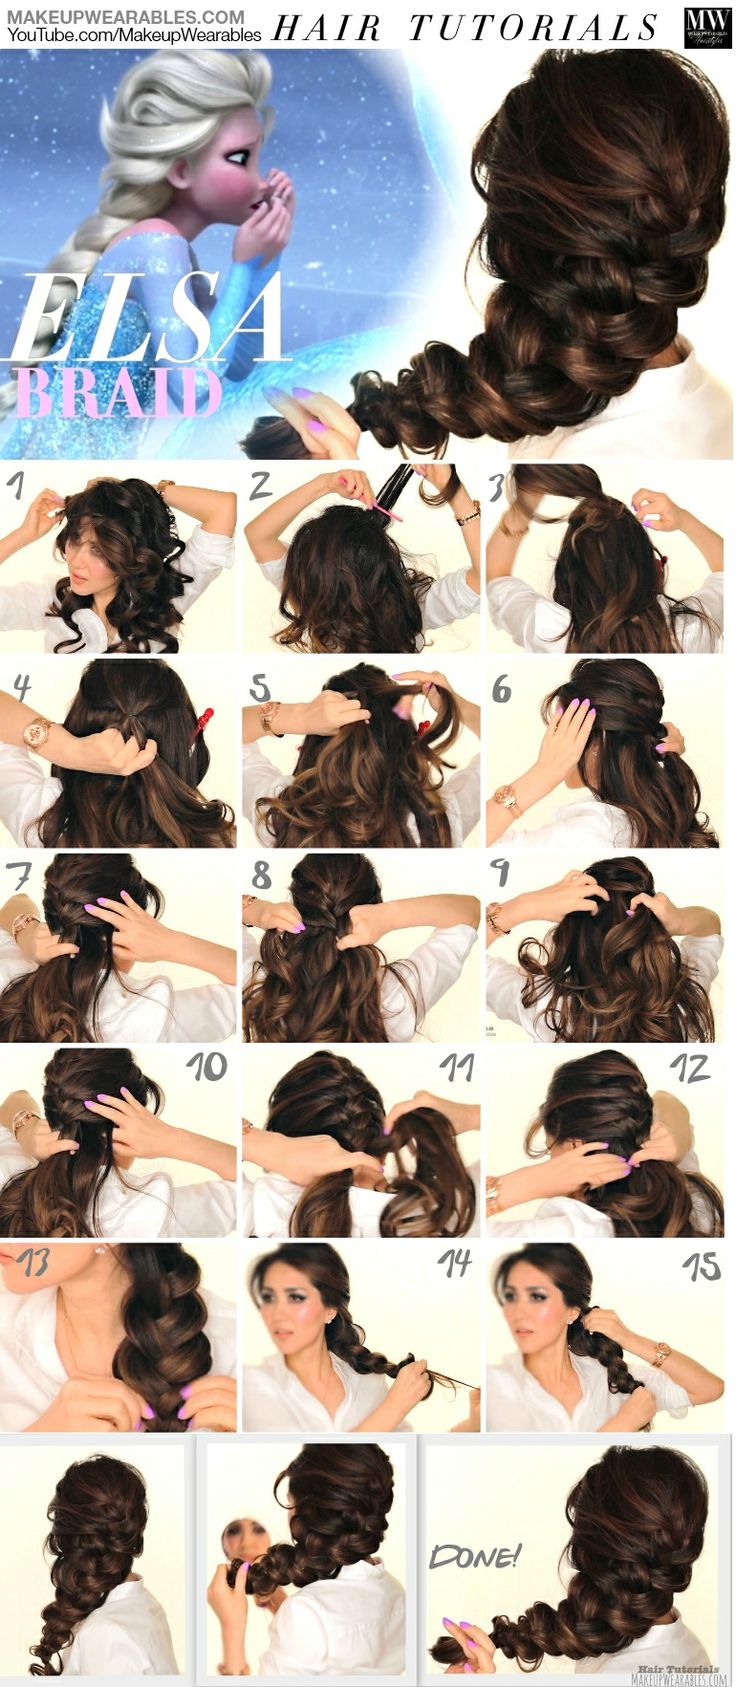 Book Tutorial on Disney Frozen and Princess Hairstyles